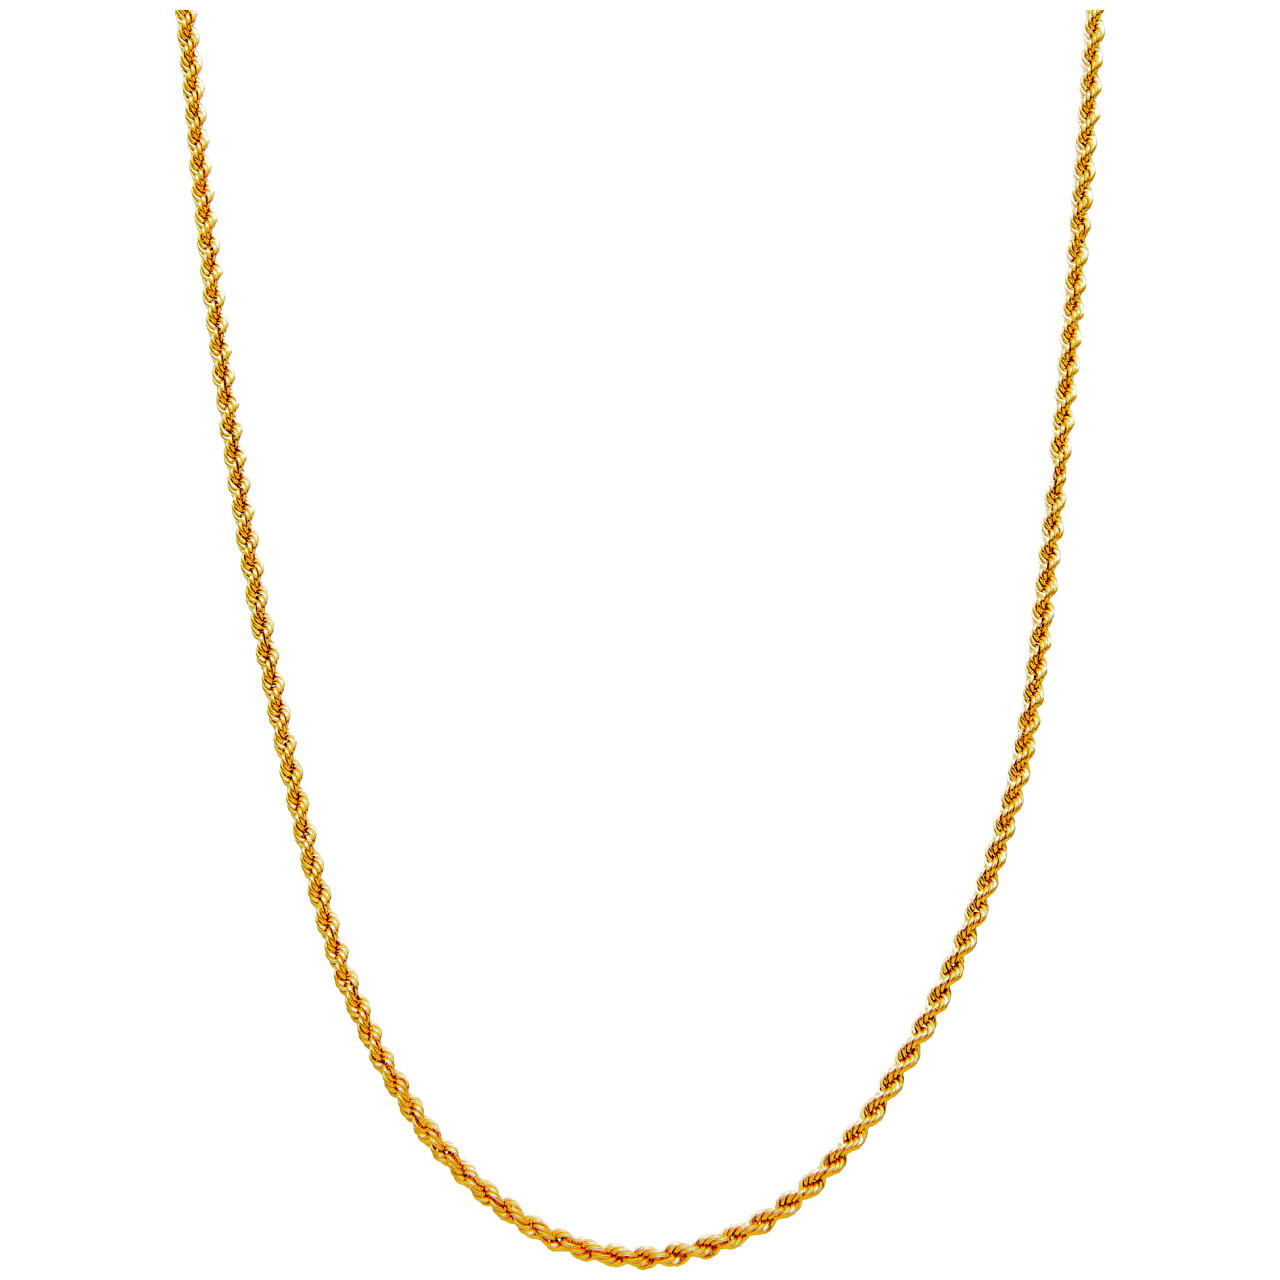 Tourchon necklace yellow gold